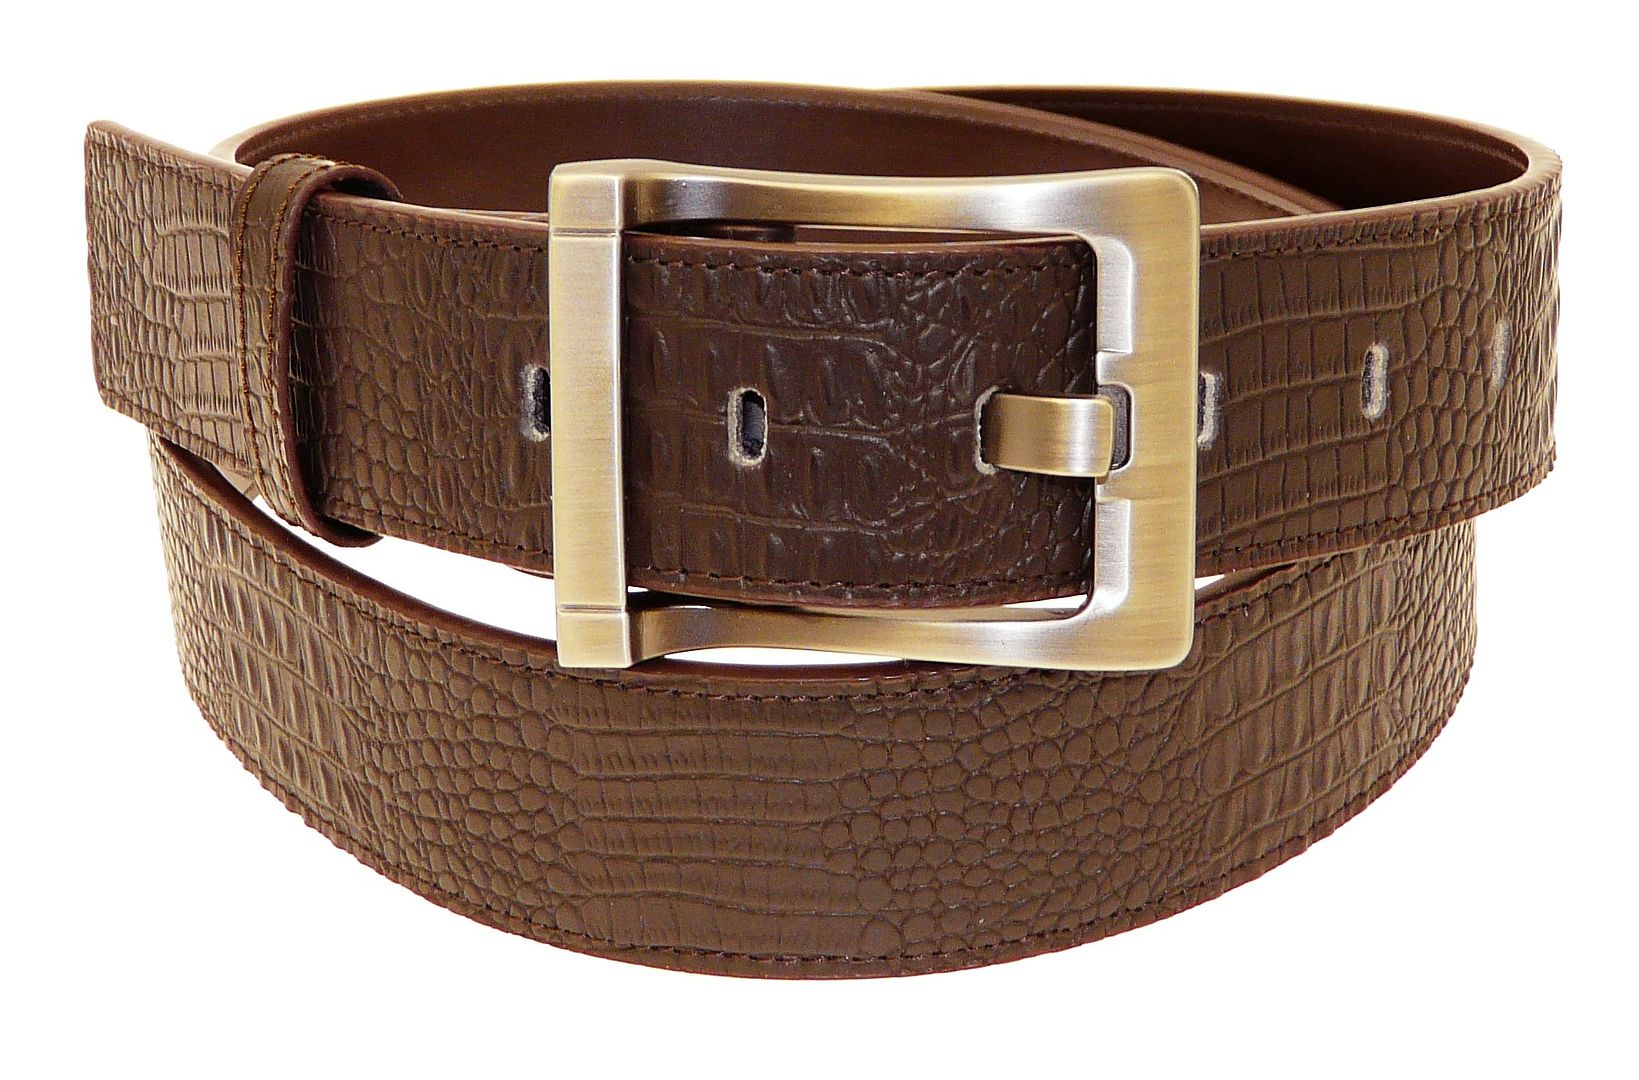 Mens Genuine Brown Leather Belt In Gift Box - All Sizes | eBay